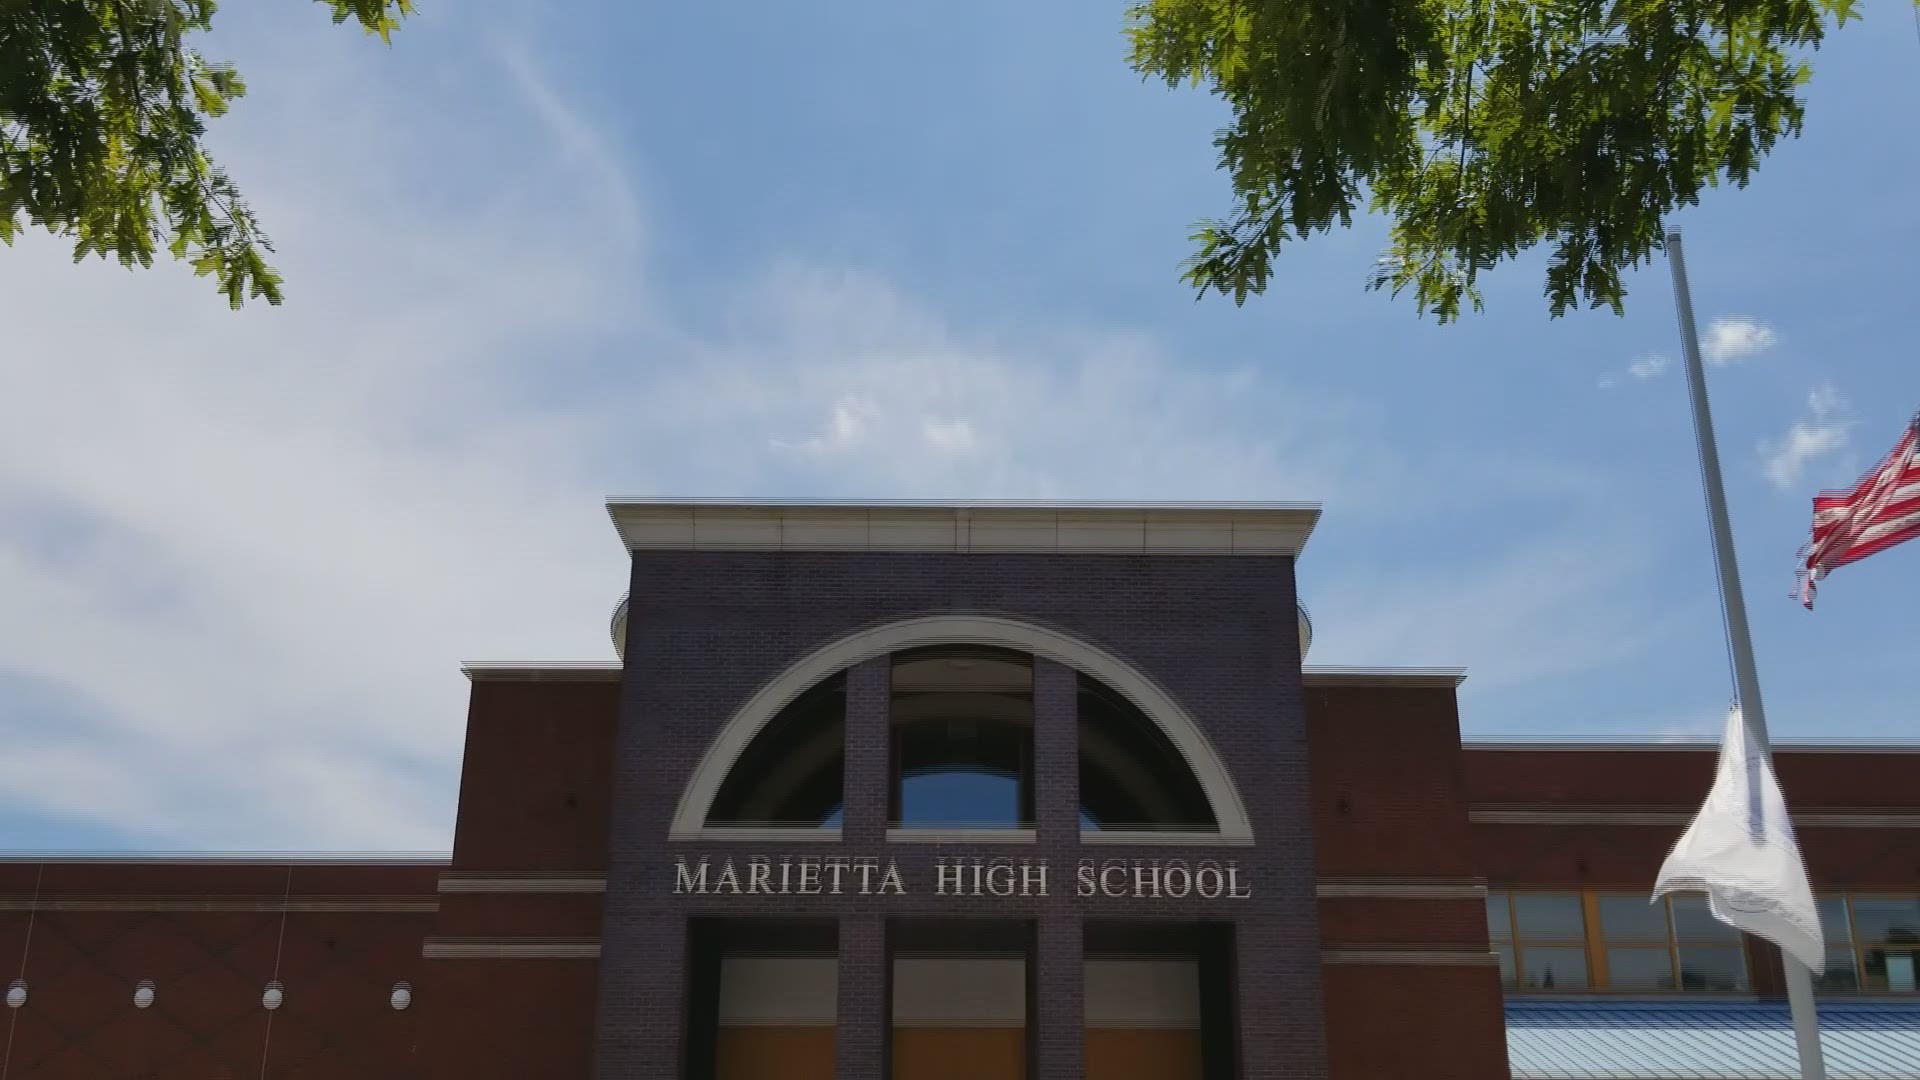 The superintendent of Marietta City Schools was just given a $10,000 bonus, but he’s putting it toward college application fees for the seniors in his district.